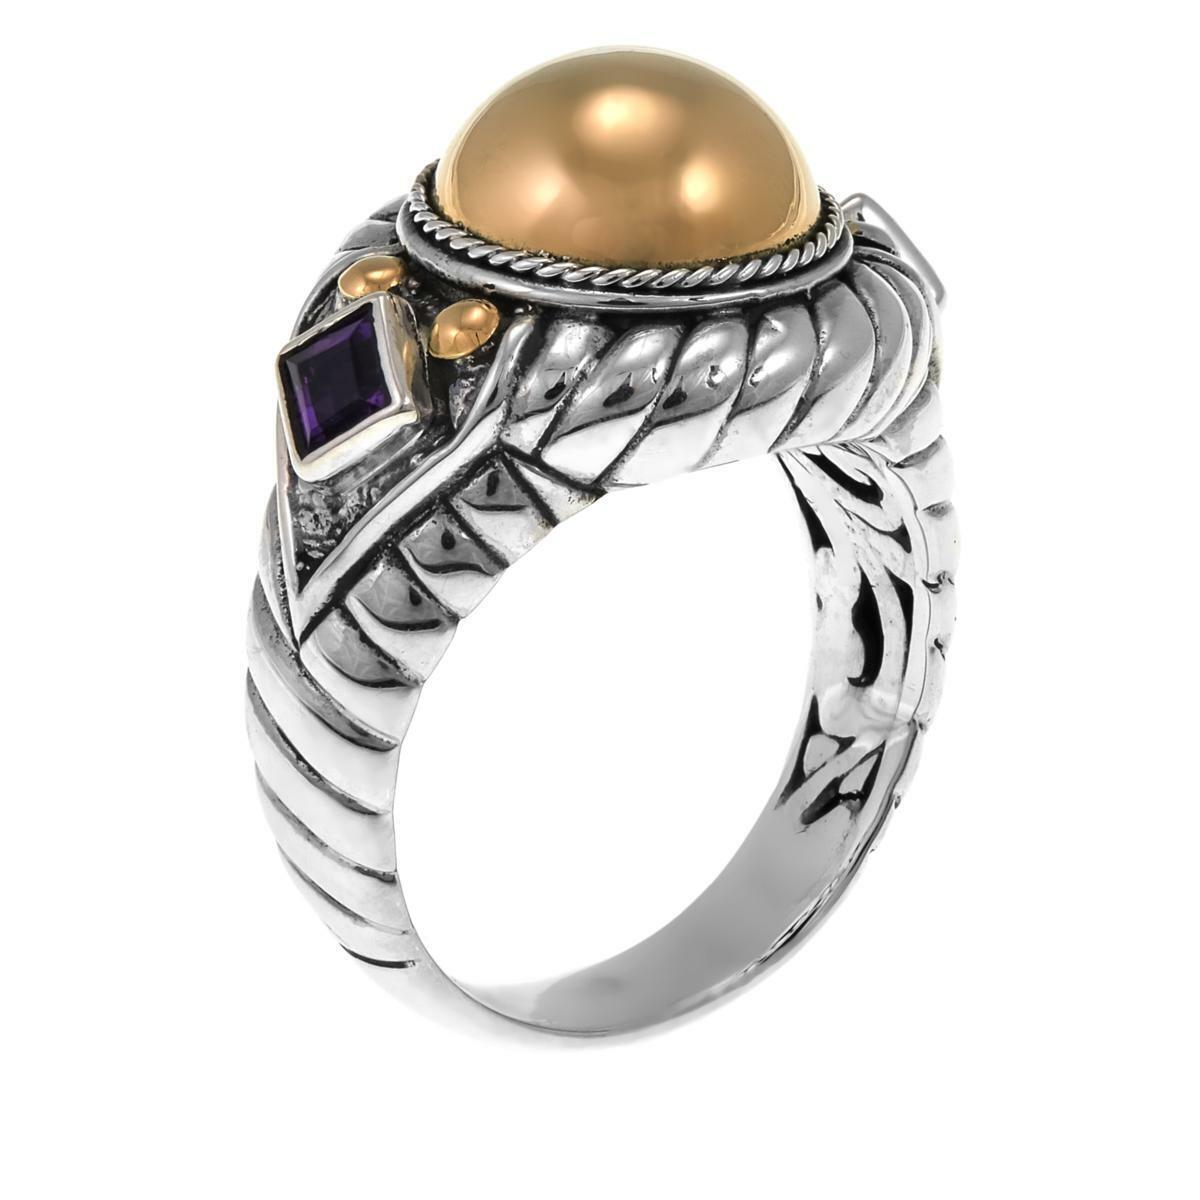 Bali Designs 2-Tone 0.22Ctw Amethyst Cable-Twist Ring Size 12 Hsn $221